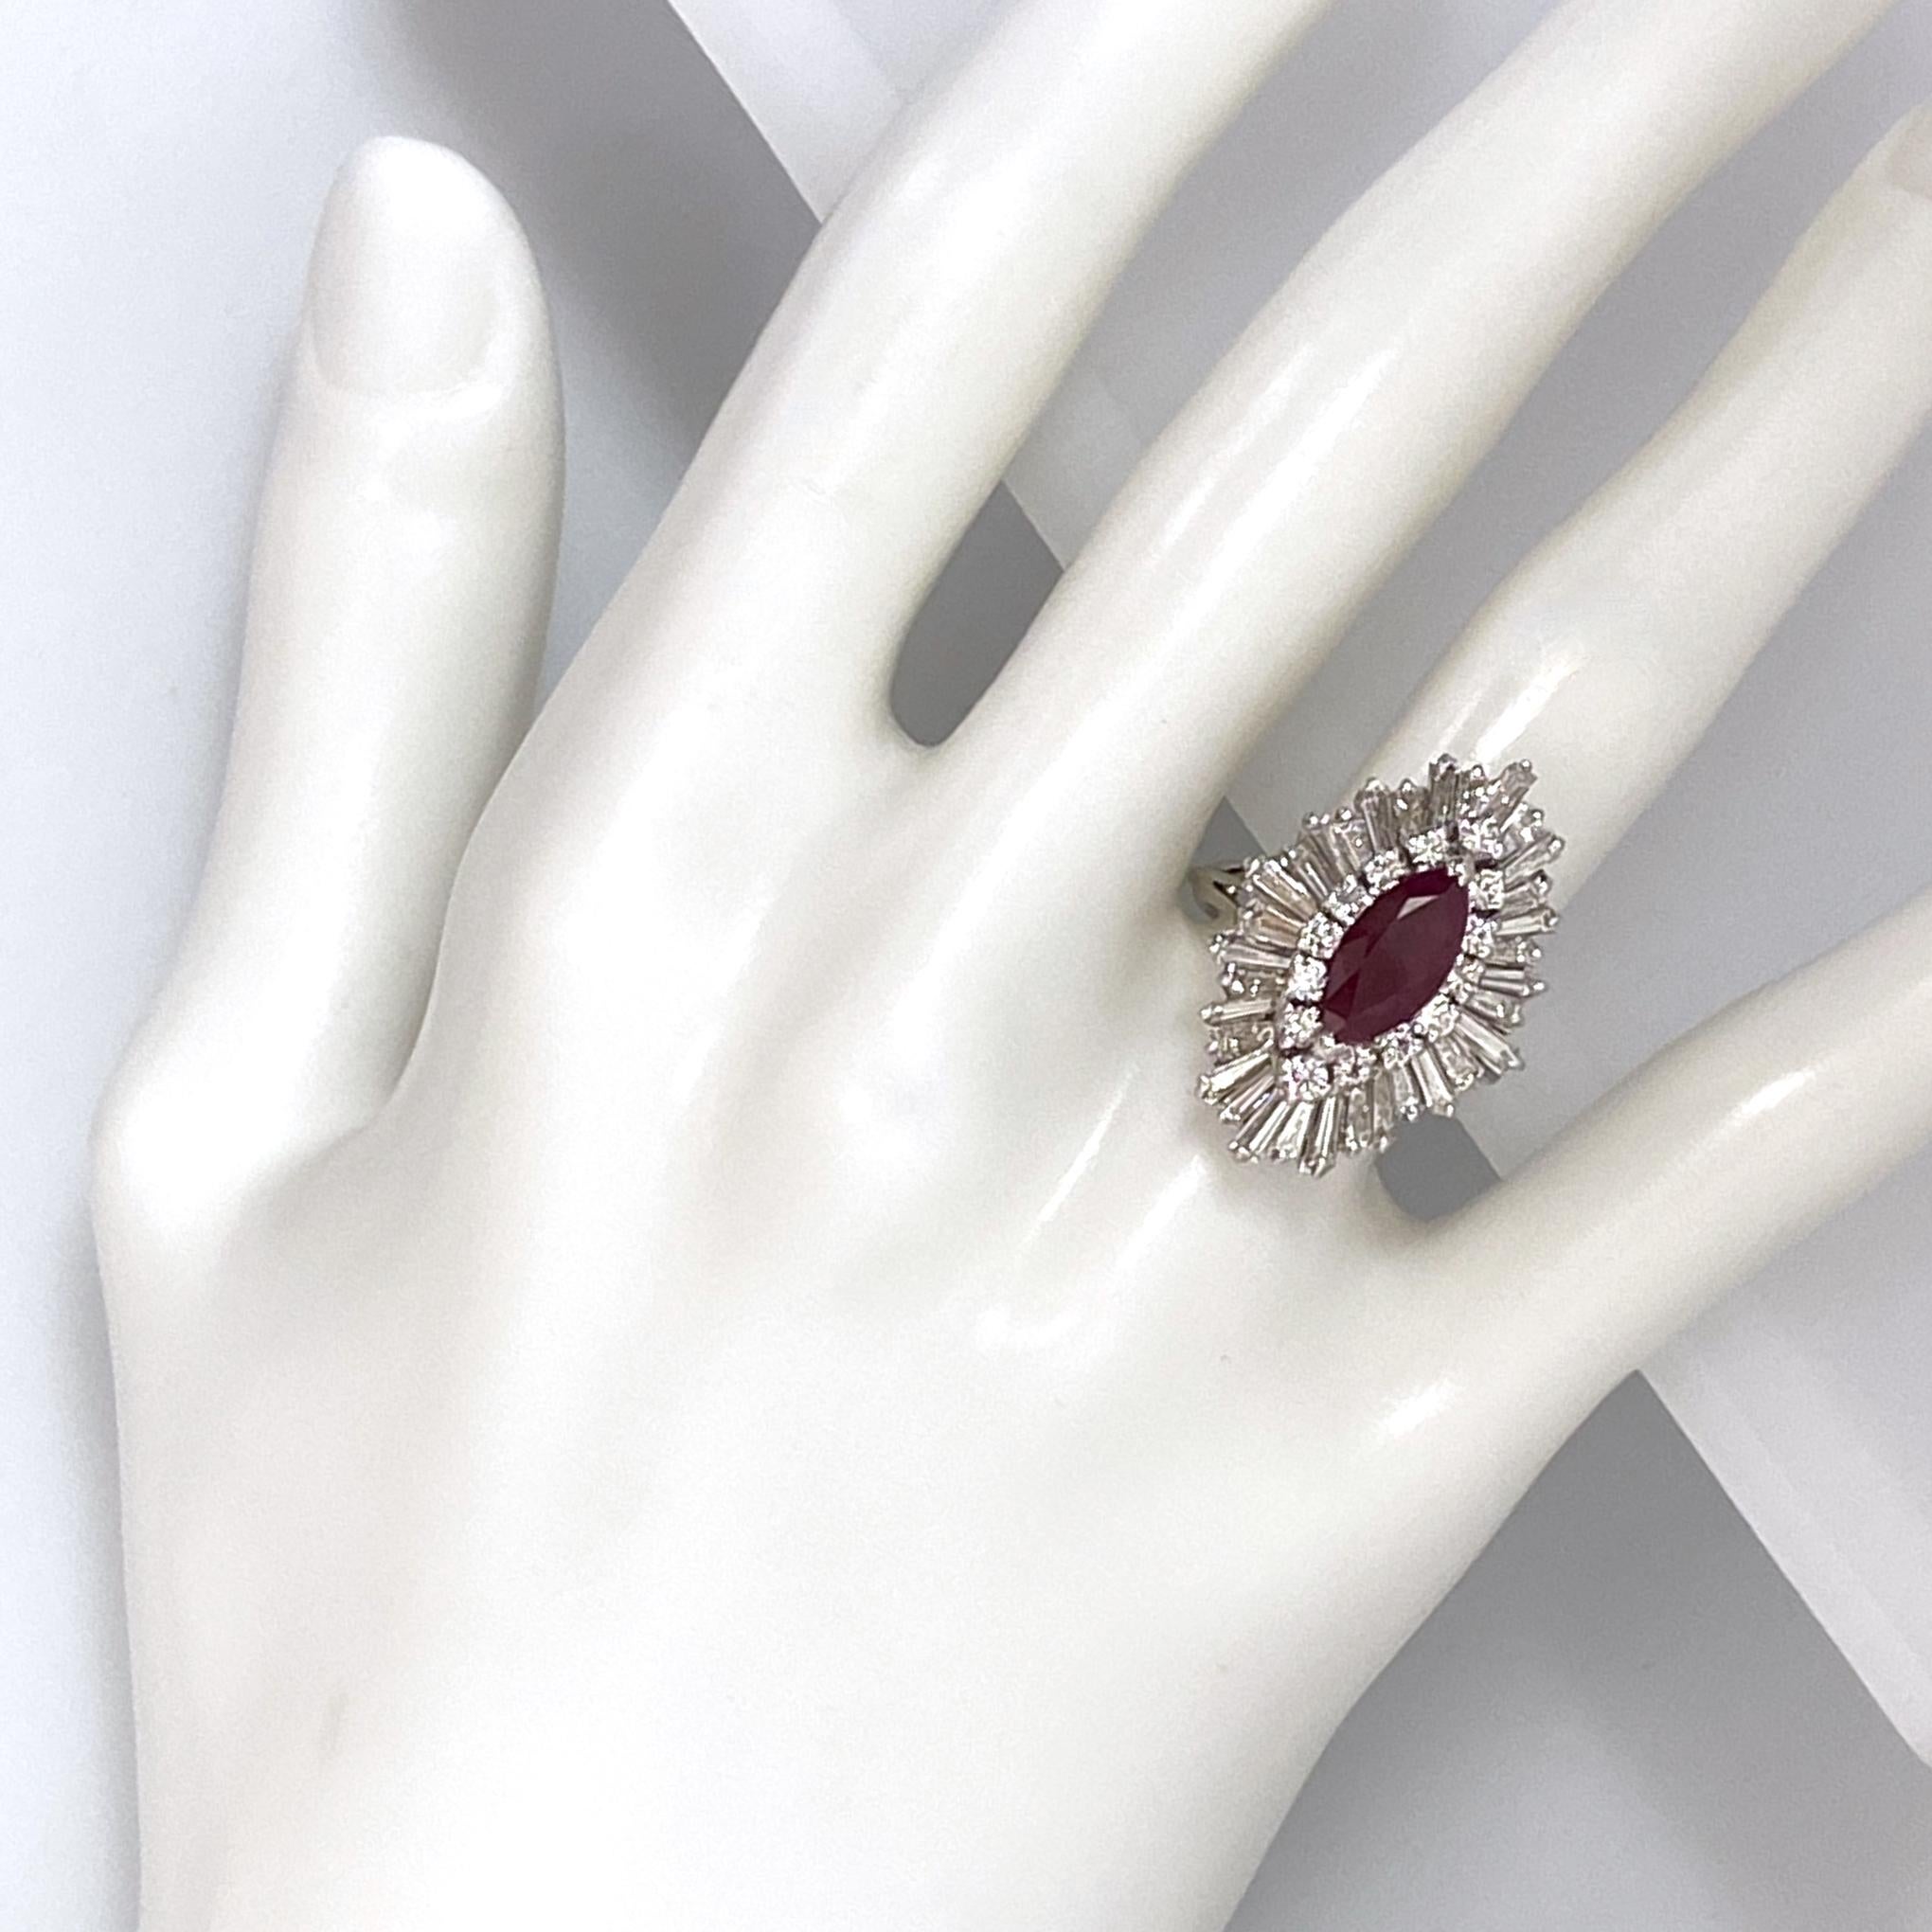 2.5 Carat Diamond Ballerina Ring with 1.78 Carat Ruby in 18 Karat White Gold In Good Condition For Sale In Sherman Oaks, CA